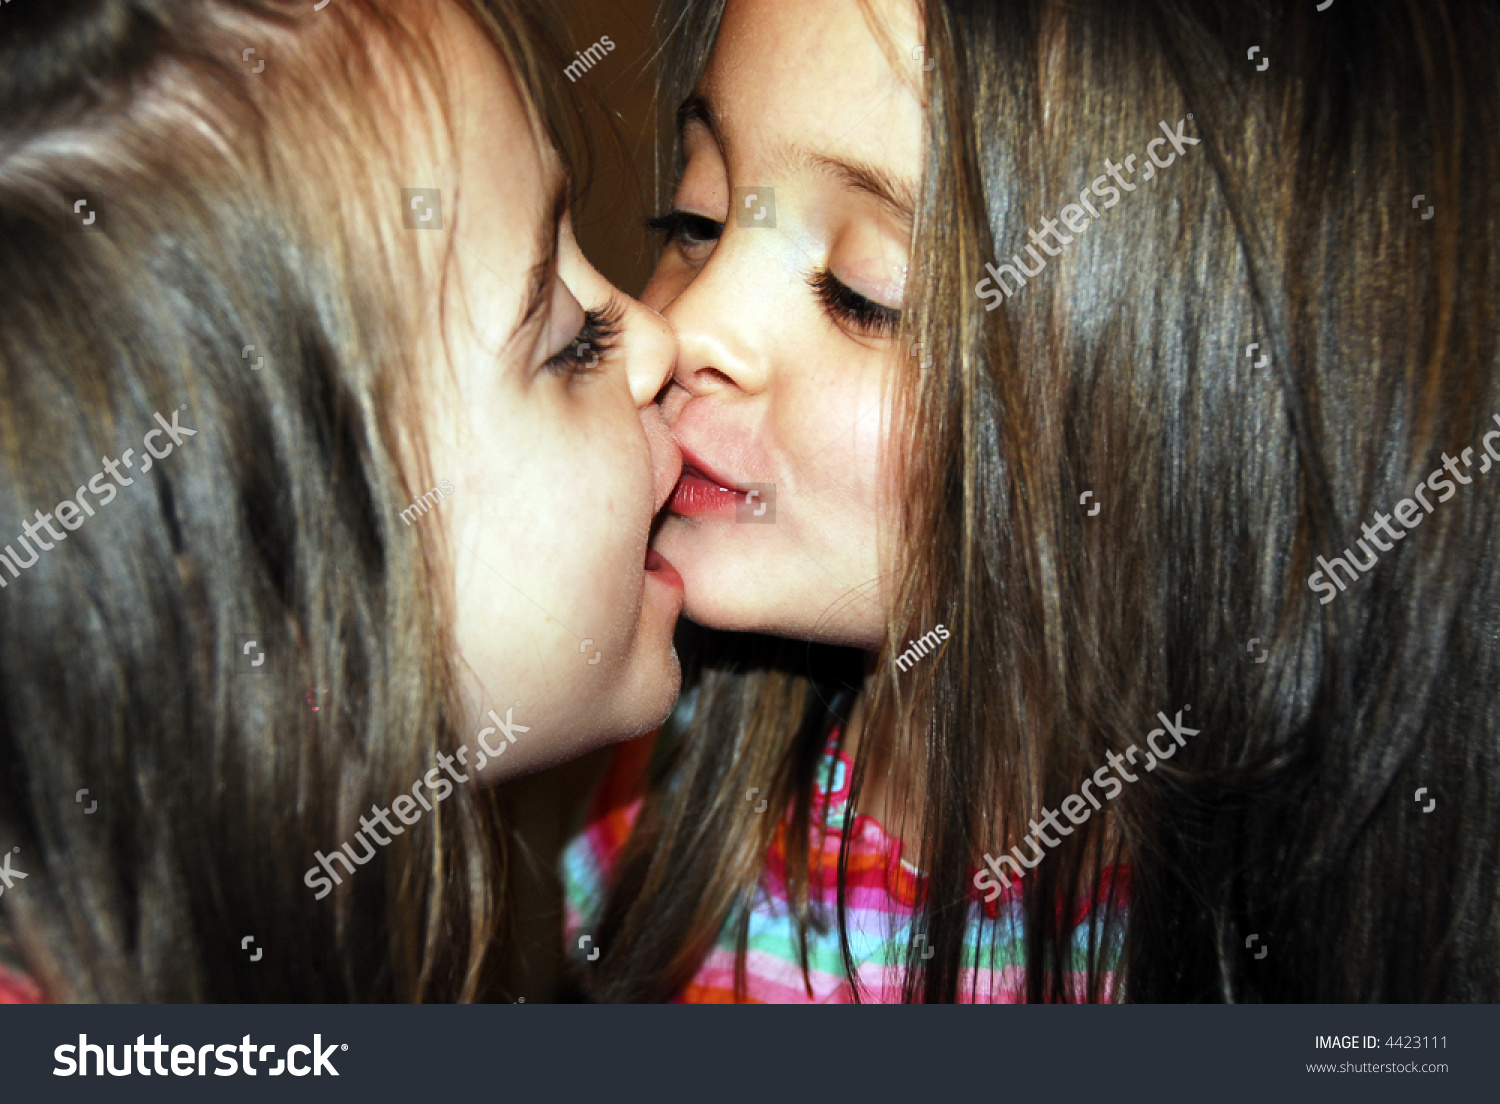 Twins kissing each other